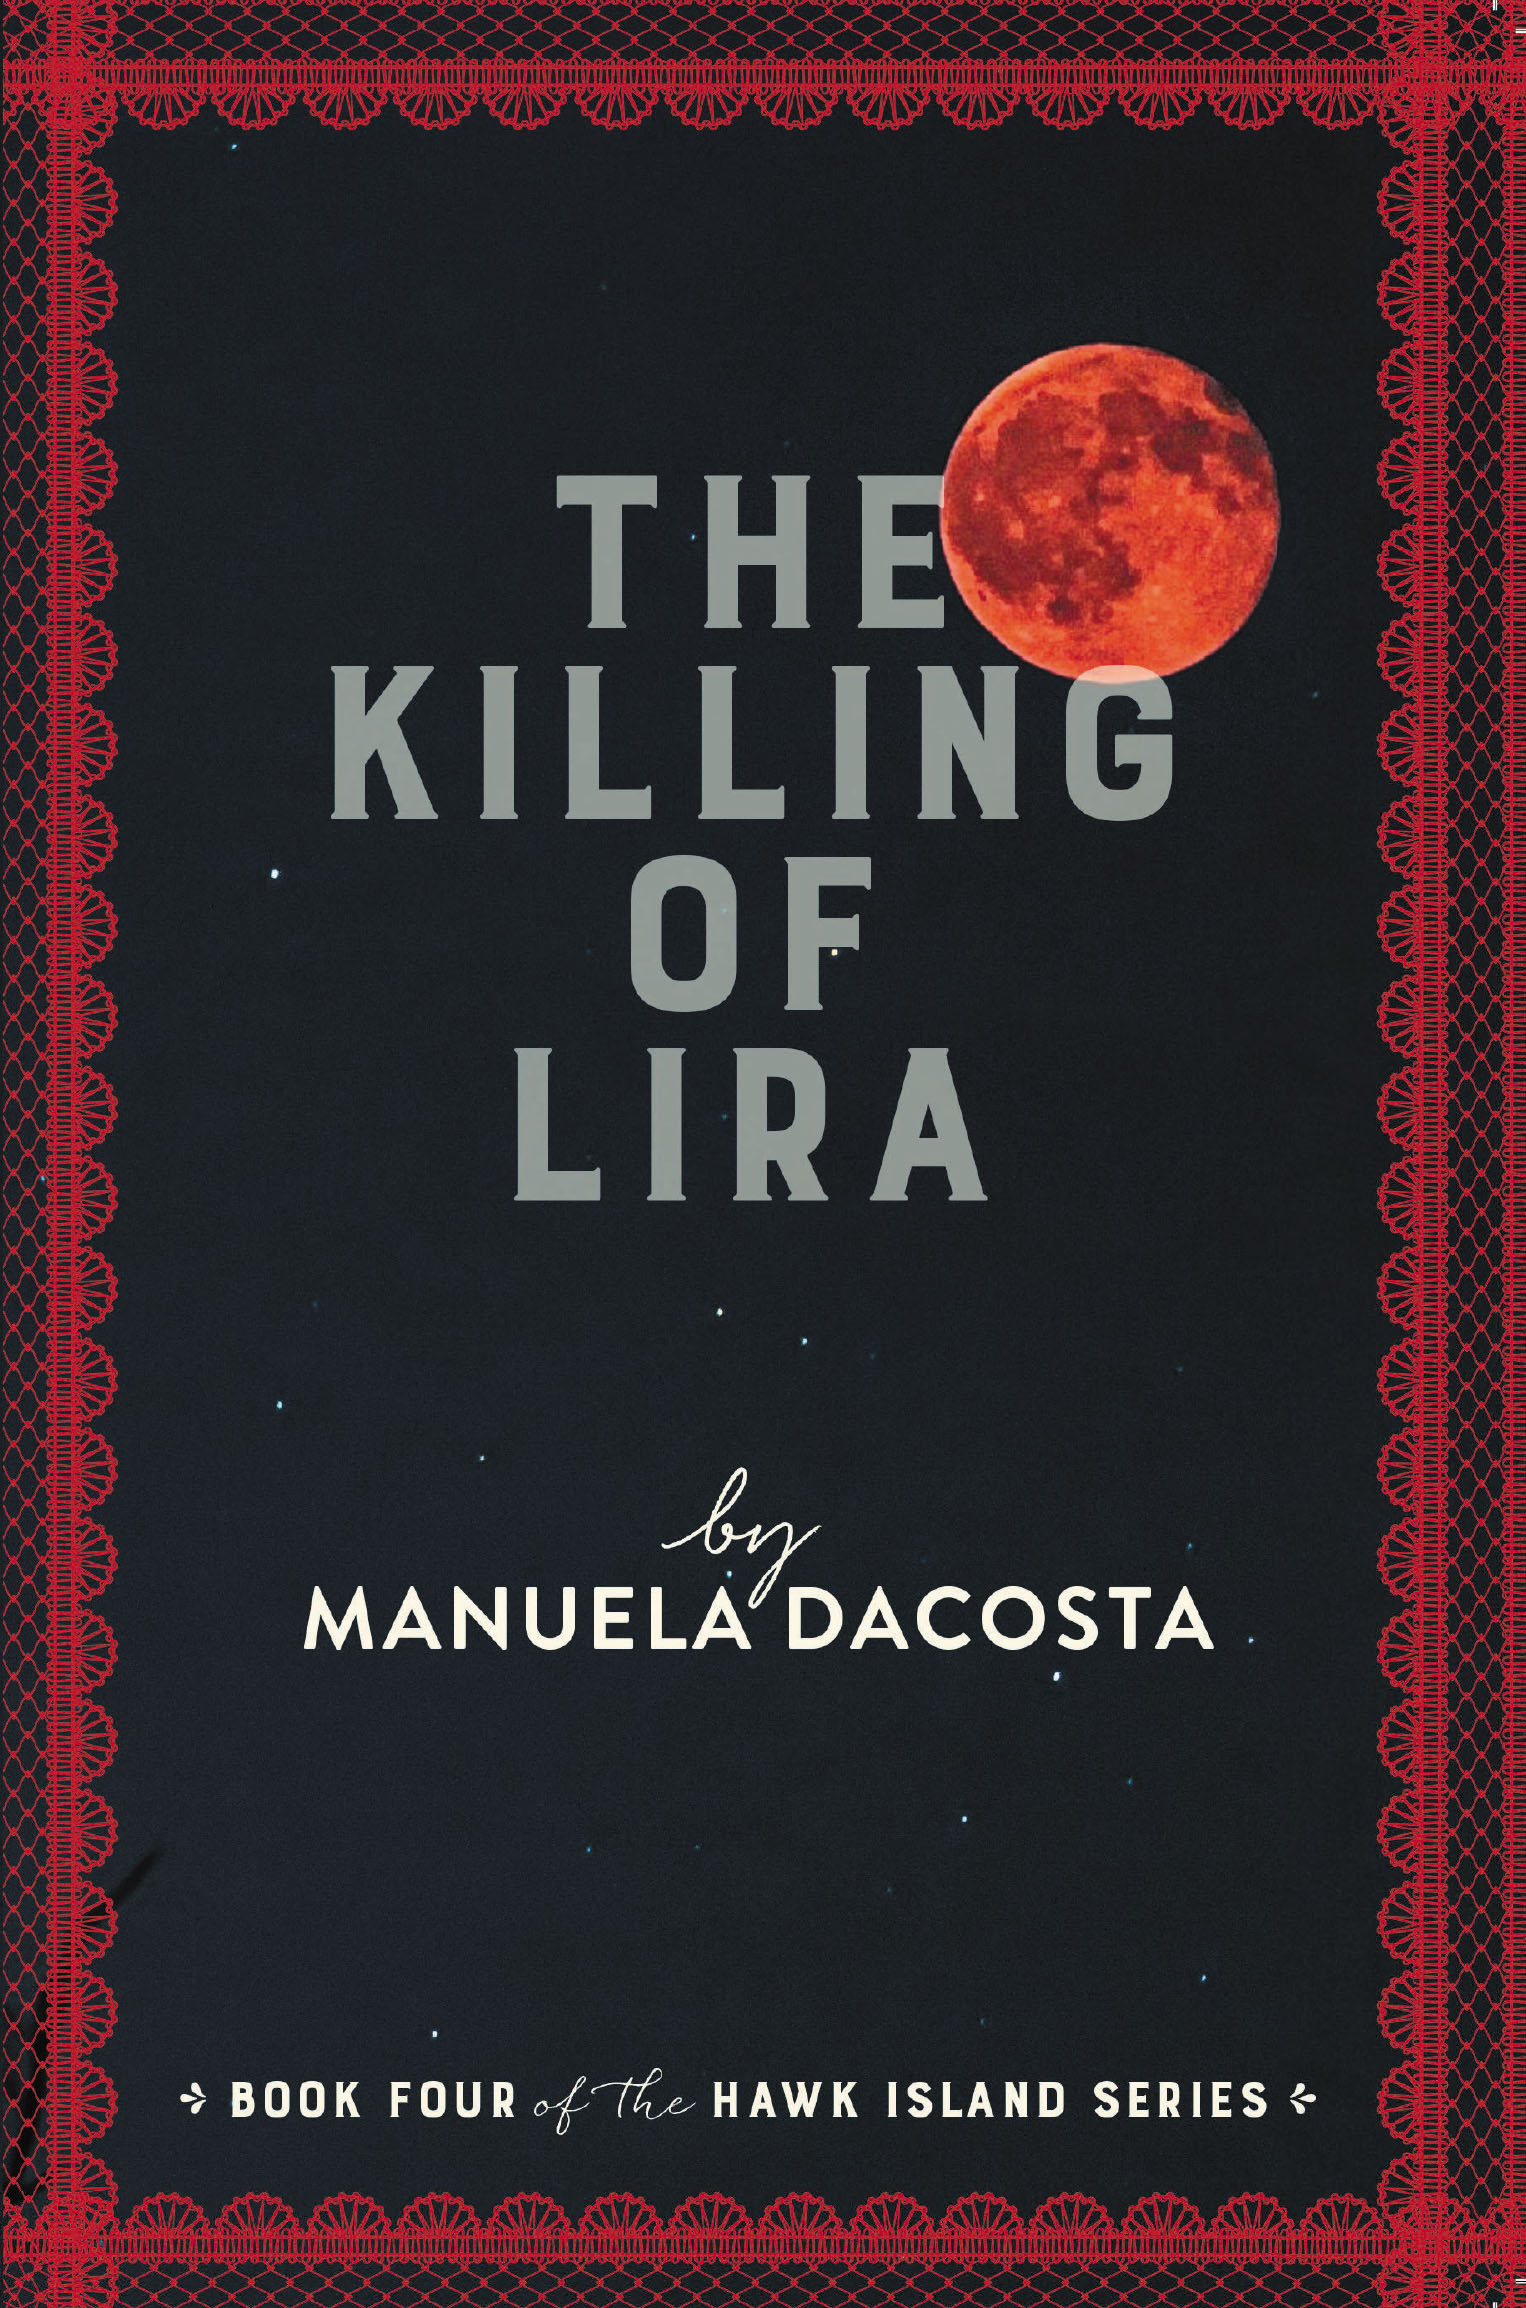 Manuela DaCosta’s New Book, “The Killing of Lira: Book Four of the Hawk Island Series,” Follows Investigations Into a Series of Break-Ins and an Old, Unsolved Murder